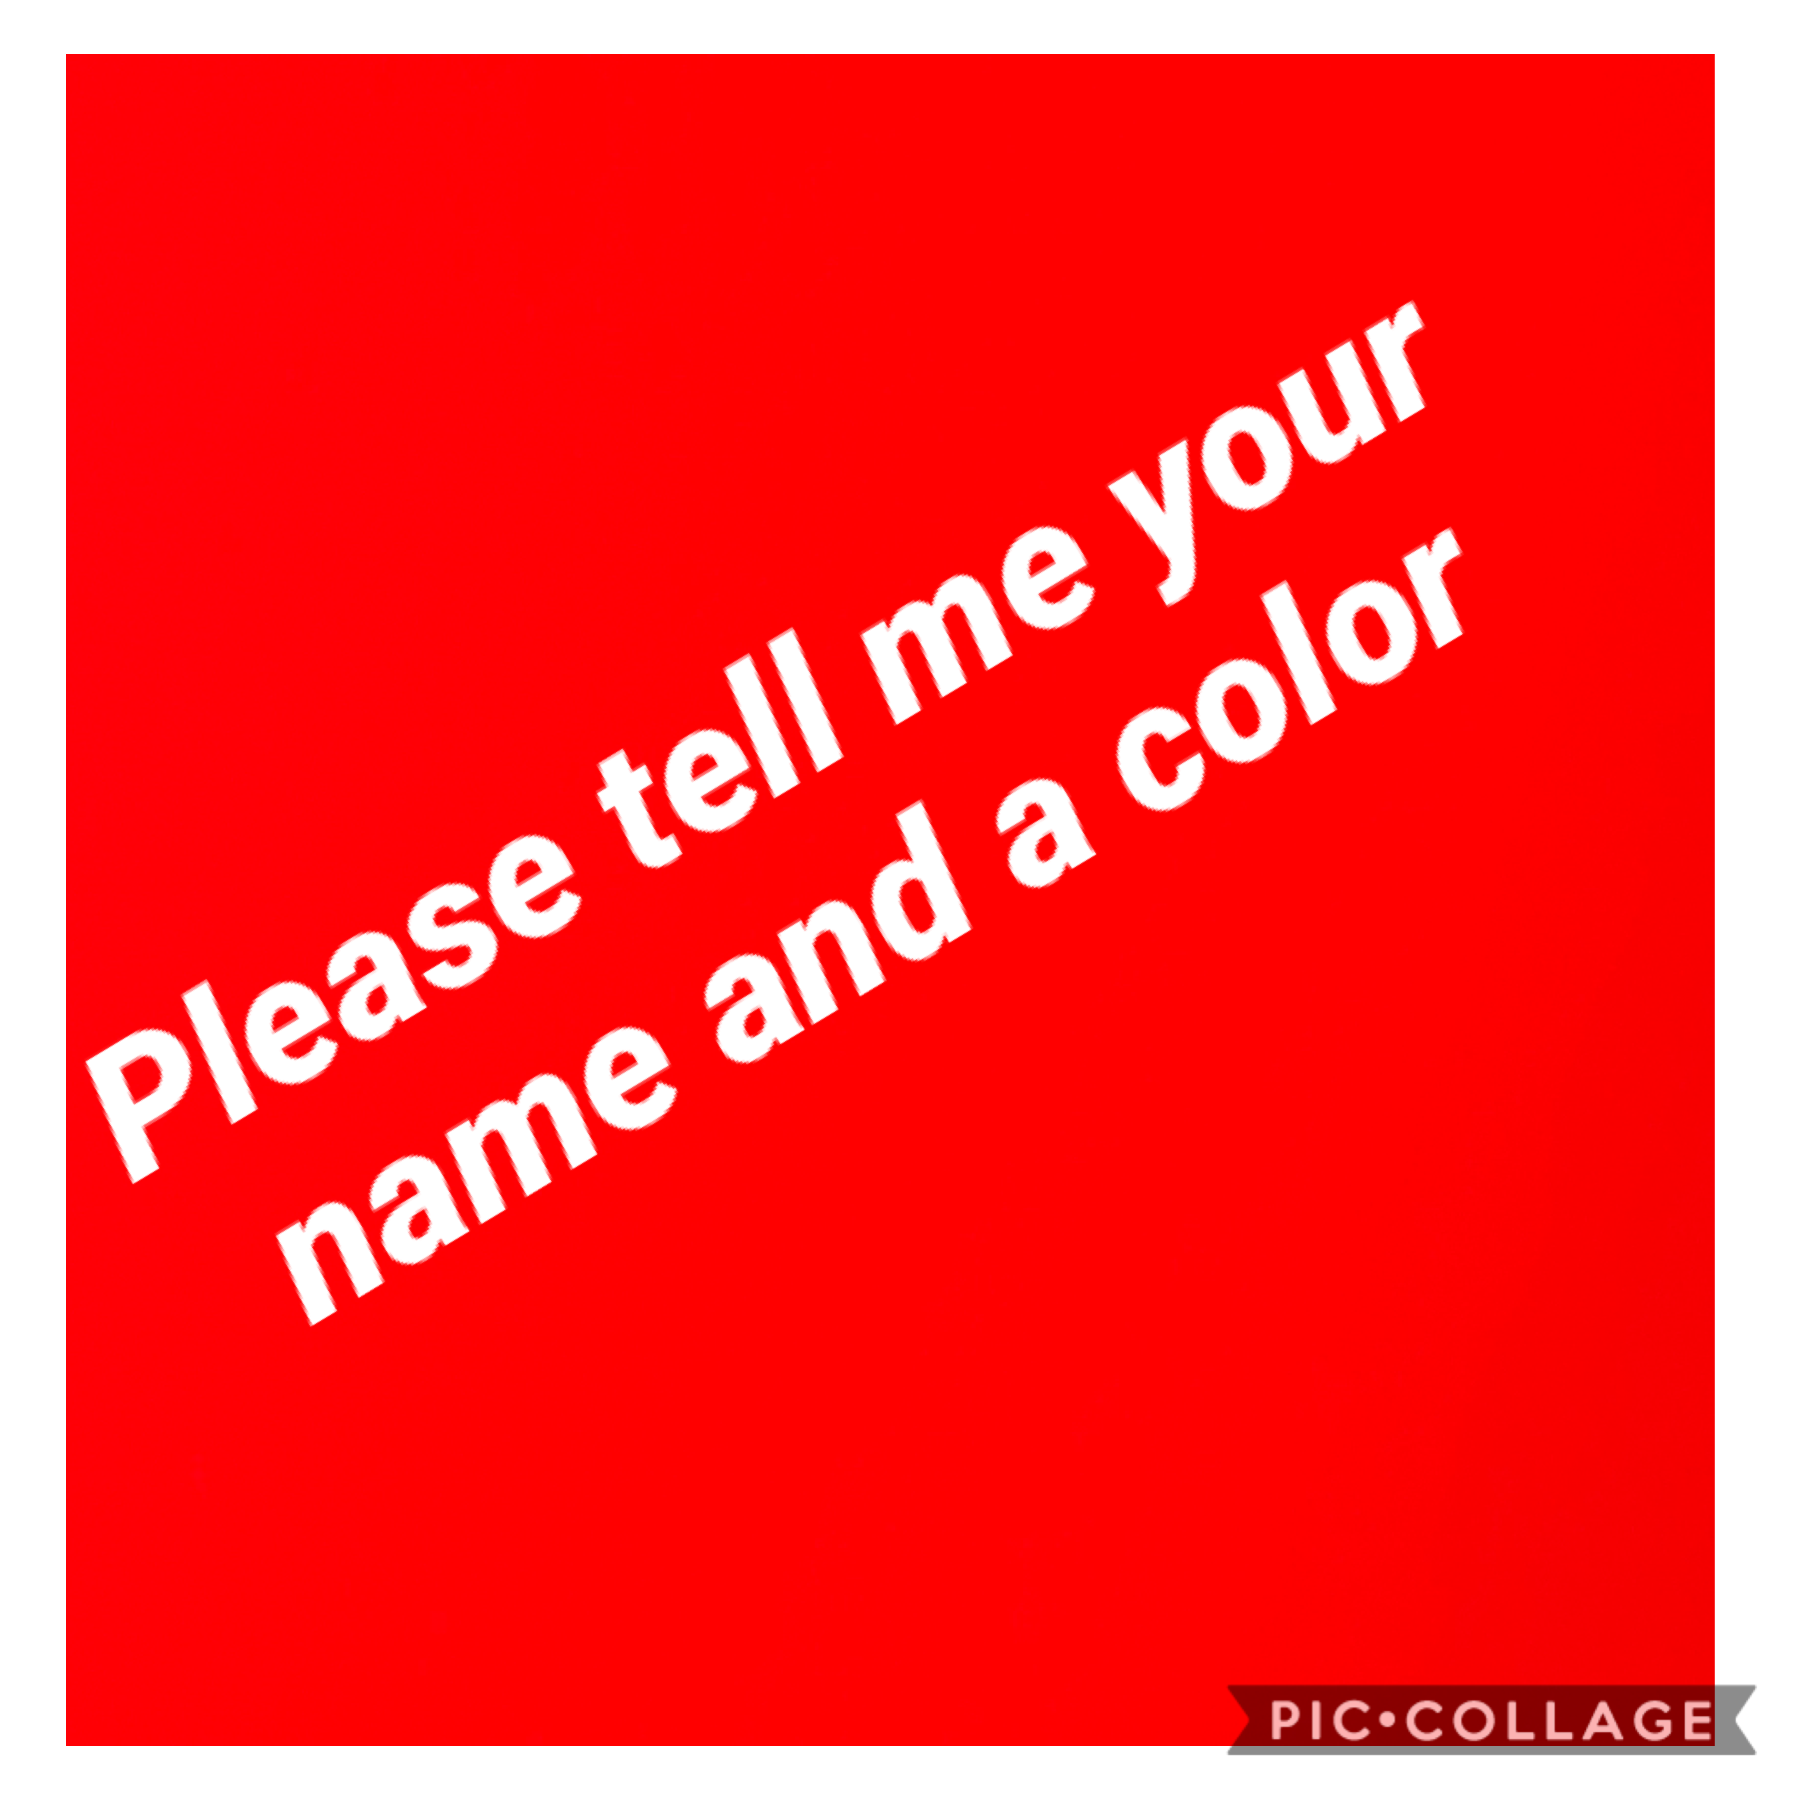 Please tell me your name and color
